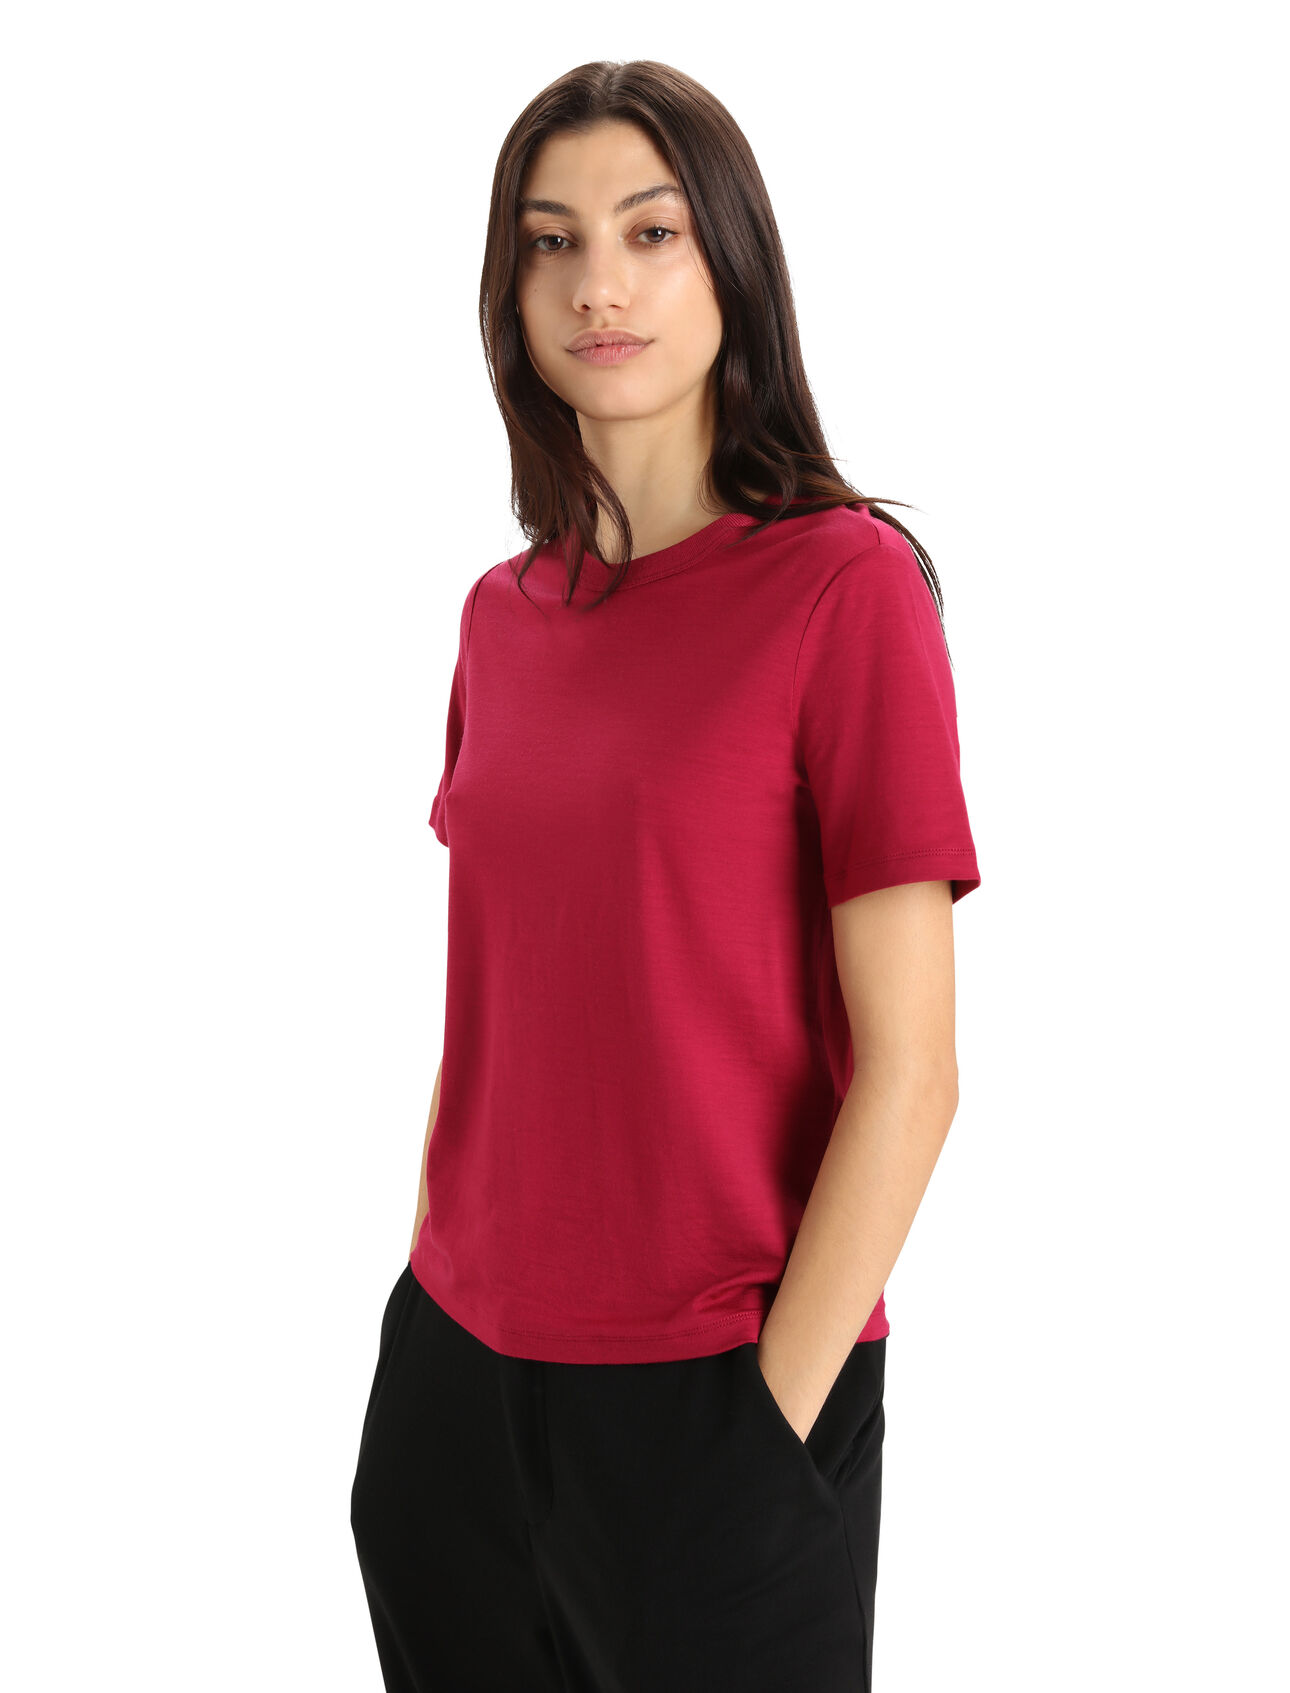 Womens MerinoFine™ Short Sleeve T-Shirt A classic and versatile everyday T-shirt made with 15.5 micron, 100% pure merino wool fibers, the MerinoFine™ Jersey Short Sleeve Tee offers up a luxuriously soft feel that’s naturally breathable and odor resistant.